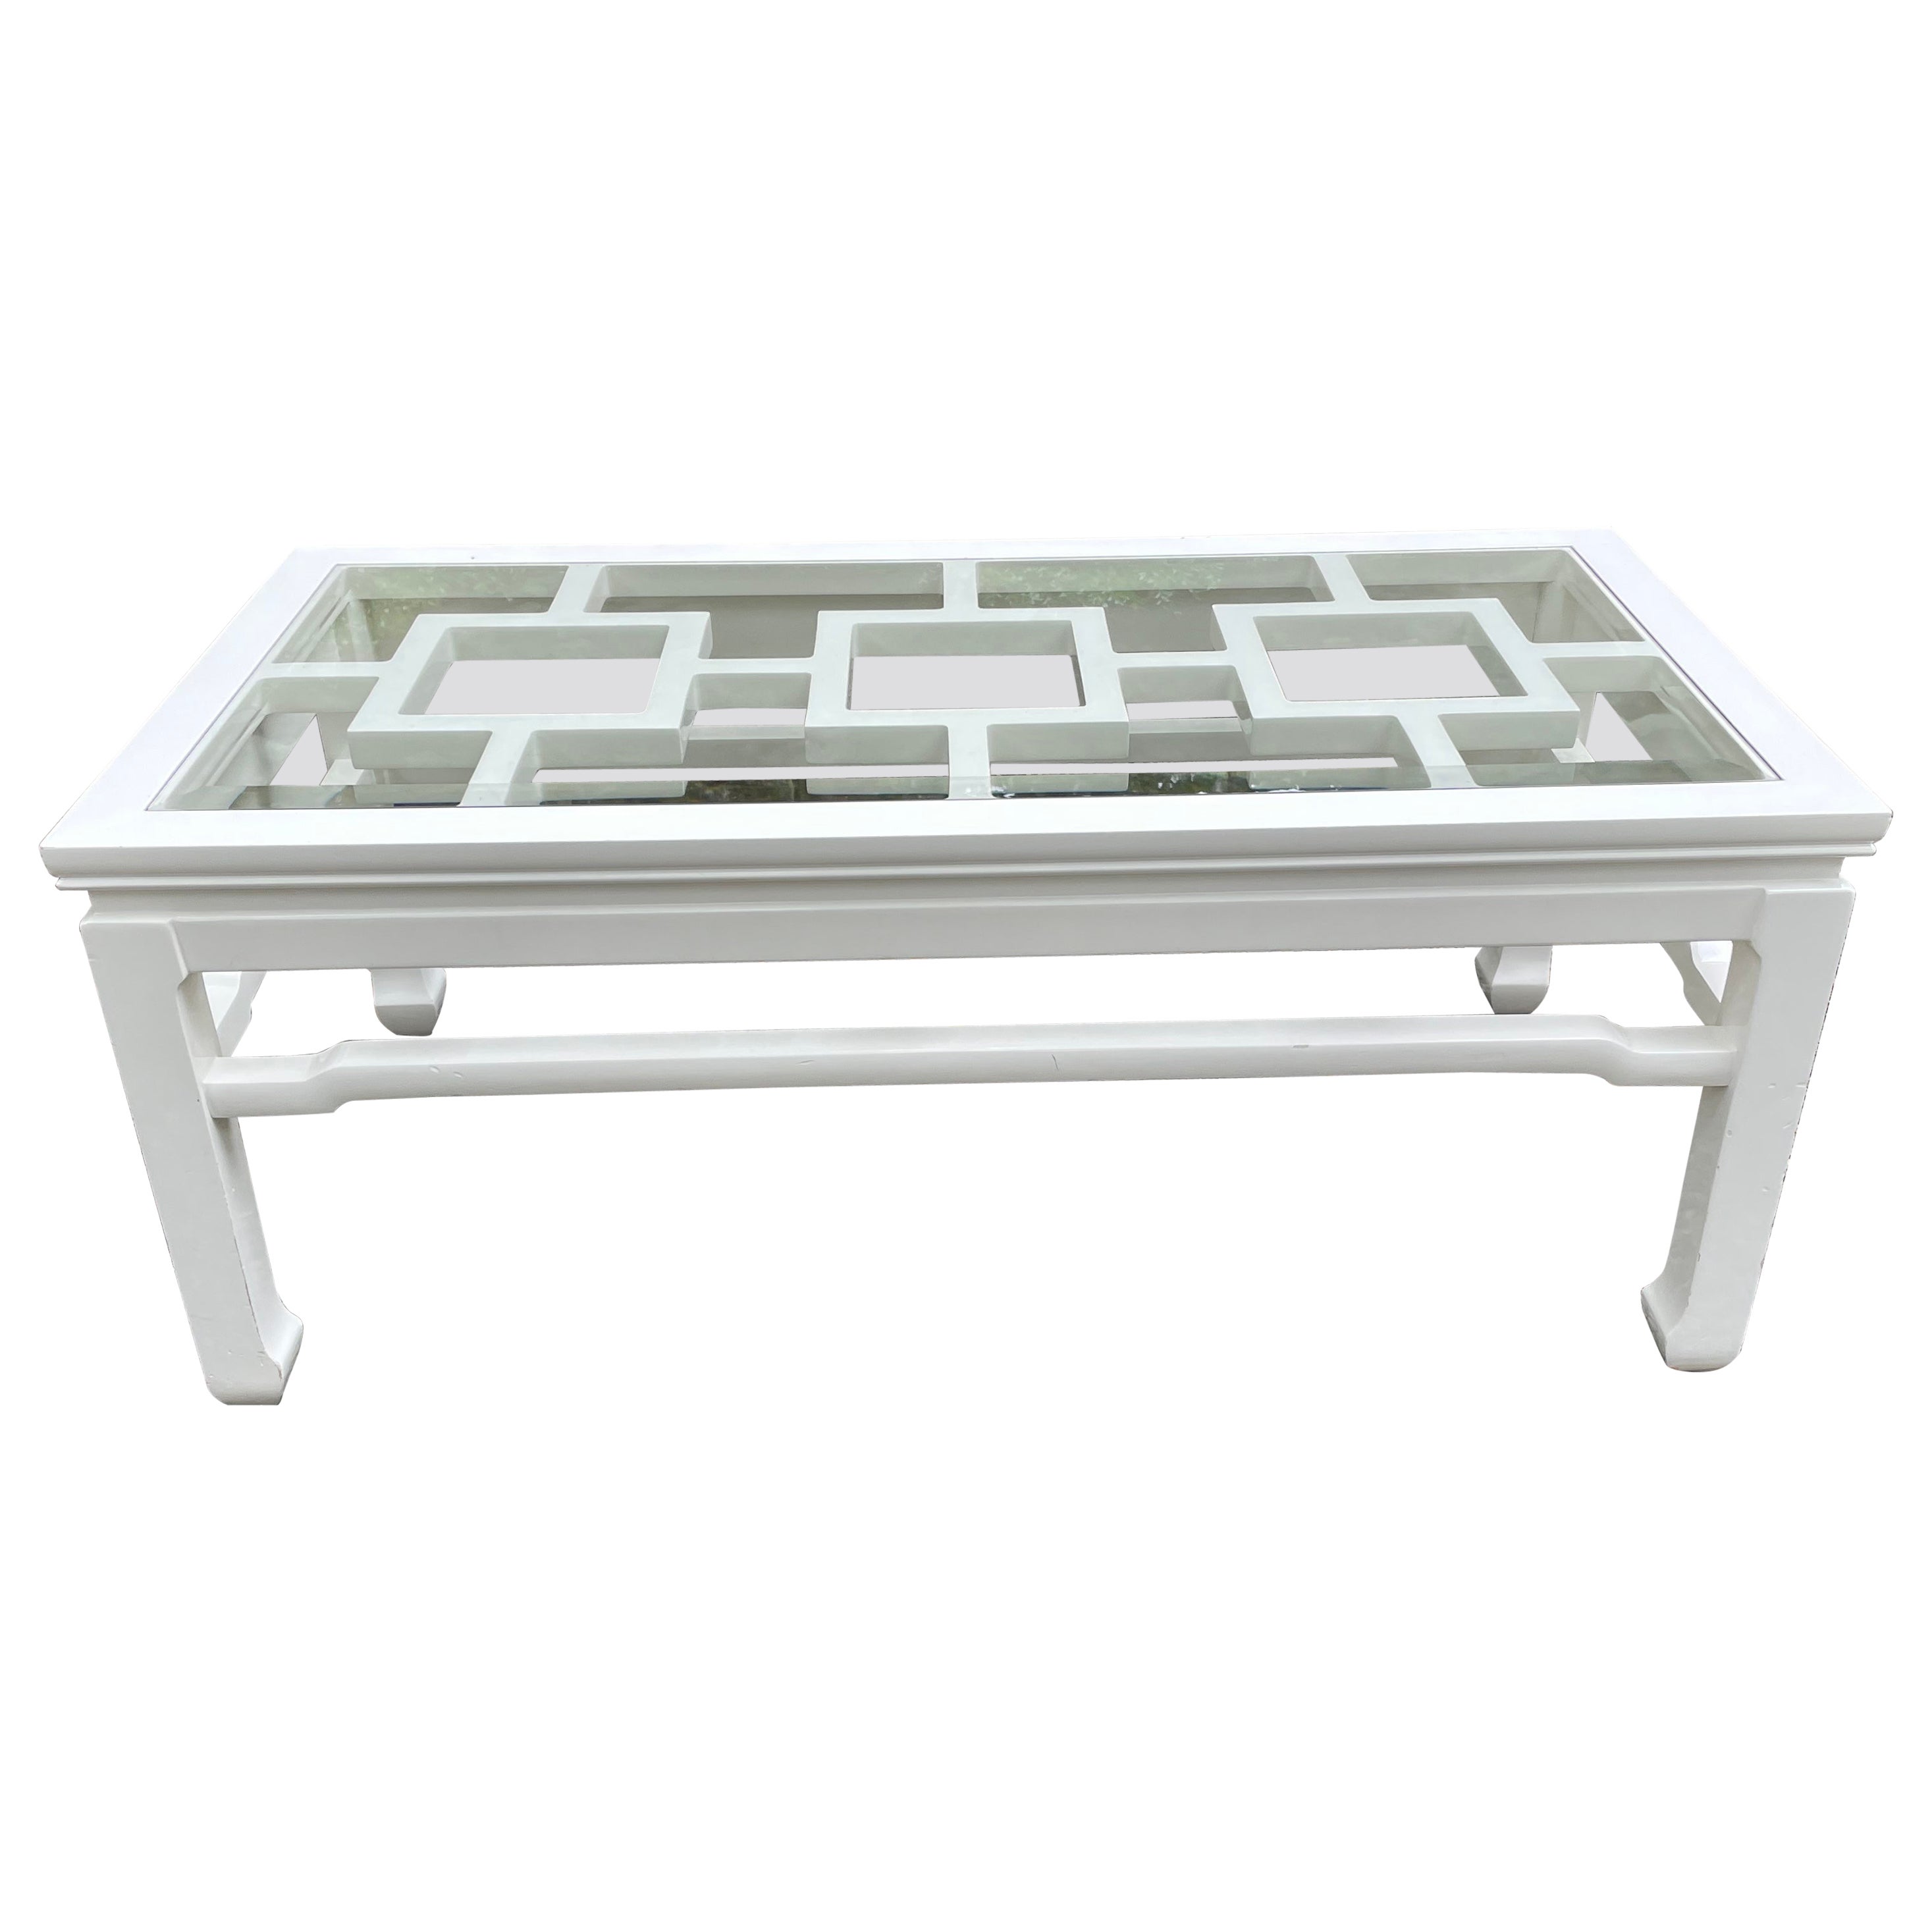 Contemporary Asian Inspired White Lacquered Rectangular Coffee Table